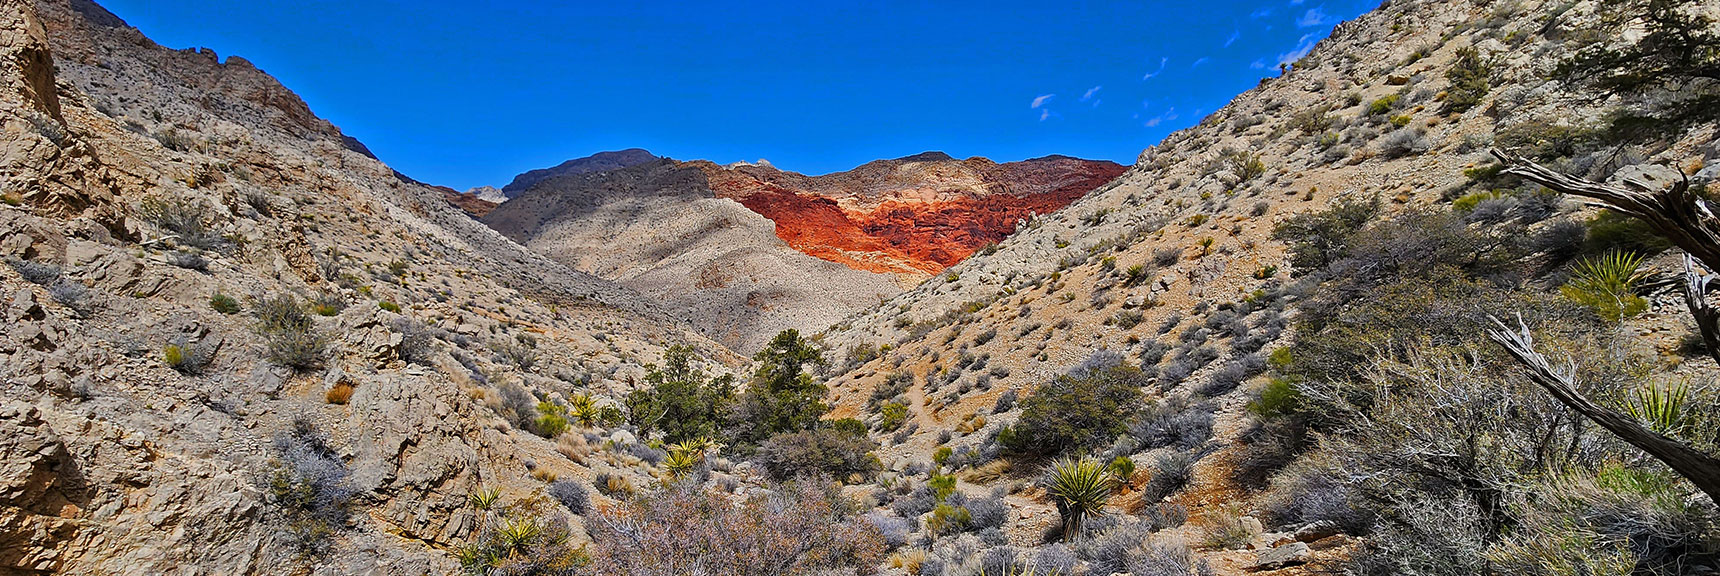 Another View Down the Rattlesnake Trail Toward Gateway Canyon in Calico Basin | Ash Canyon to Calico Tanks | Calico Basin and Red Rock Canyon, Nevada | David Smith | Las Vegas Area Trails